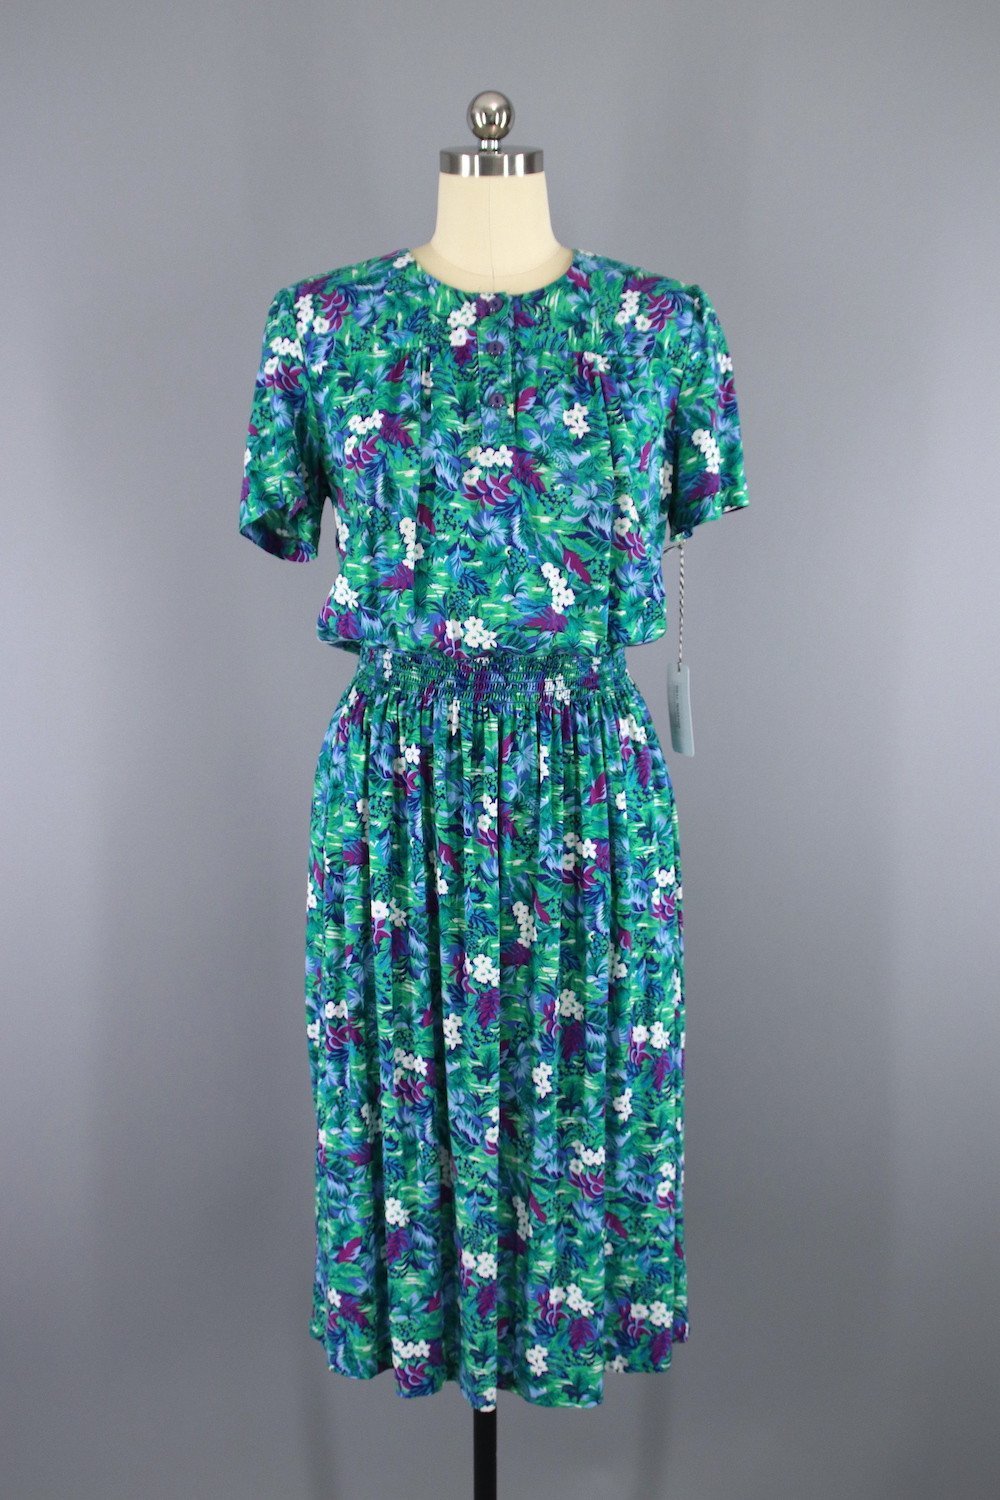 Vintage 1980s Blue Floral Print Day Dress - ThisBlueBird